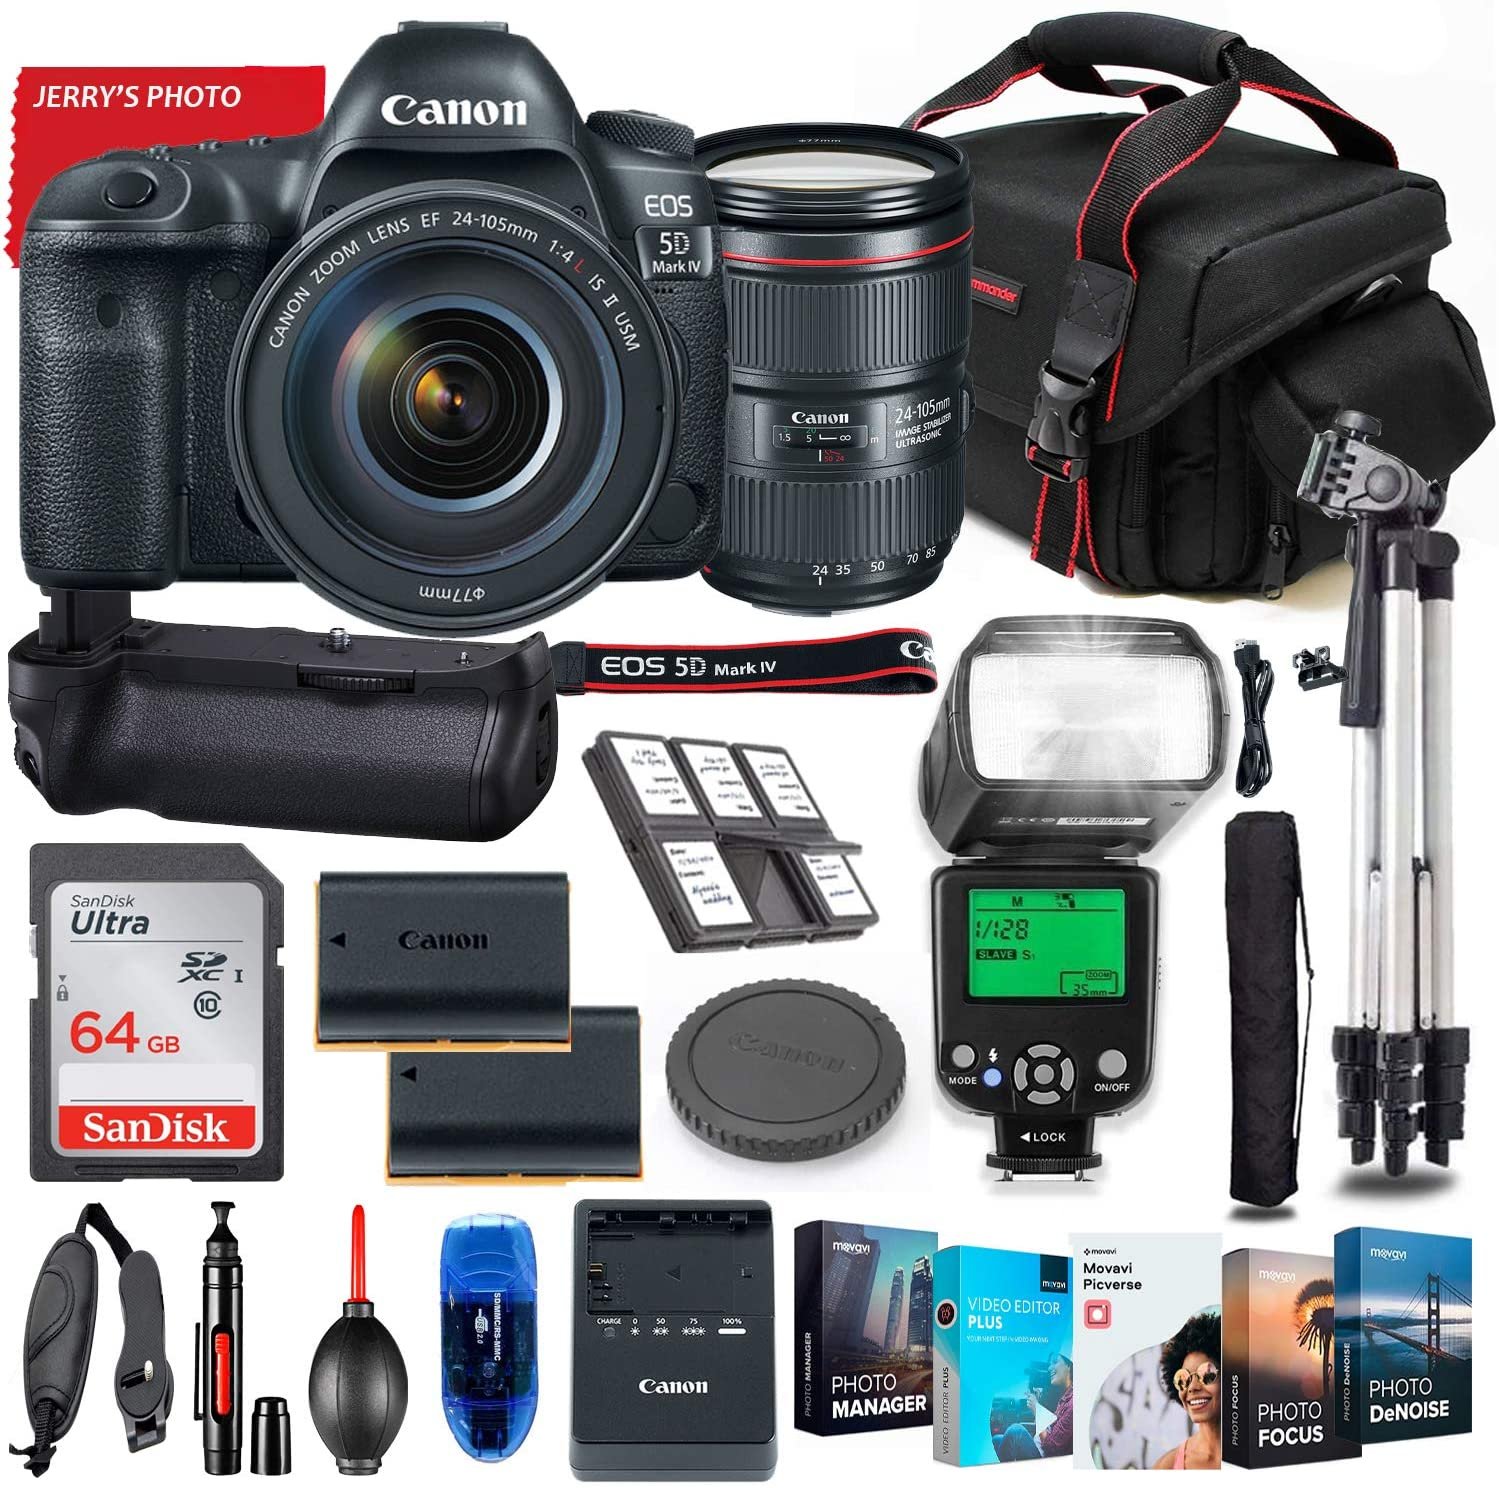 Canon EOS 5D Mark IV DSLR Camera with 24-105mm USM Lens Bundle + Battery Grip + Premium Accessory Bundle Including 64GB Memory, Extra Battery, Filters, Photo/Video Software Package, Bag & More - image 1 of 8